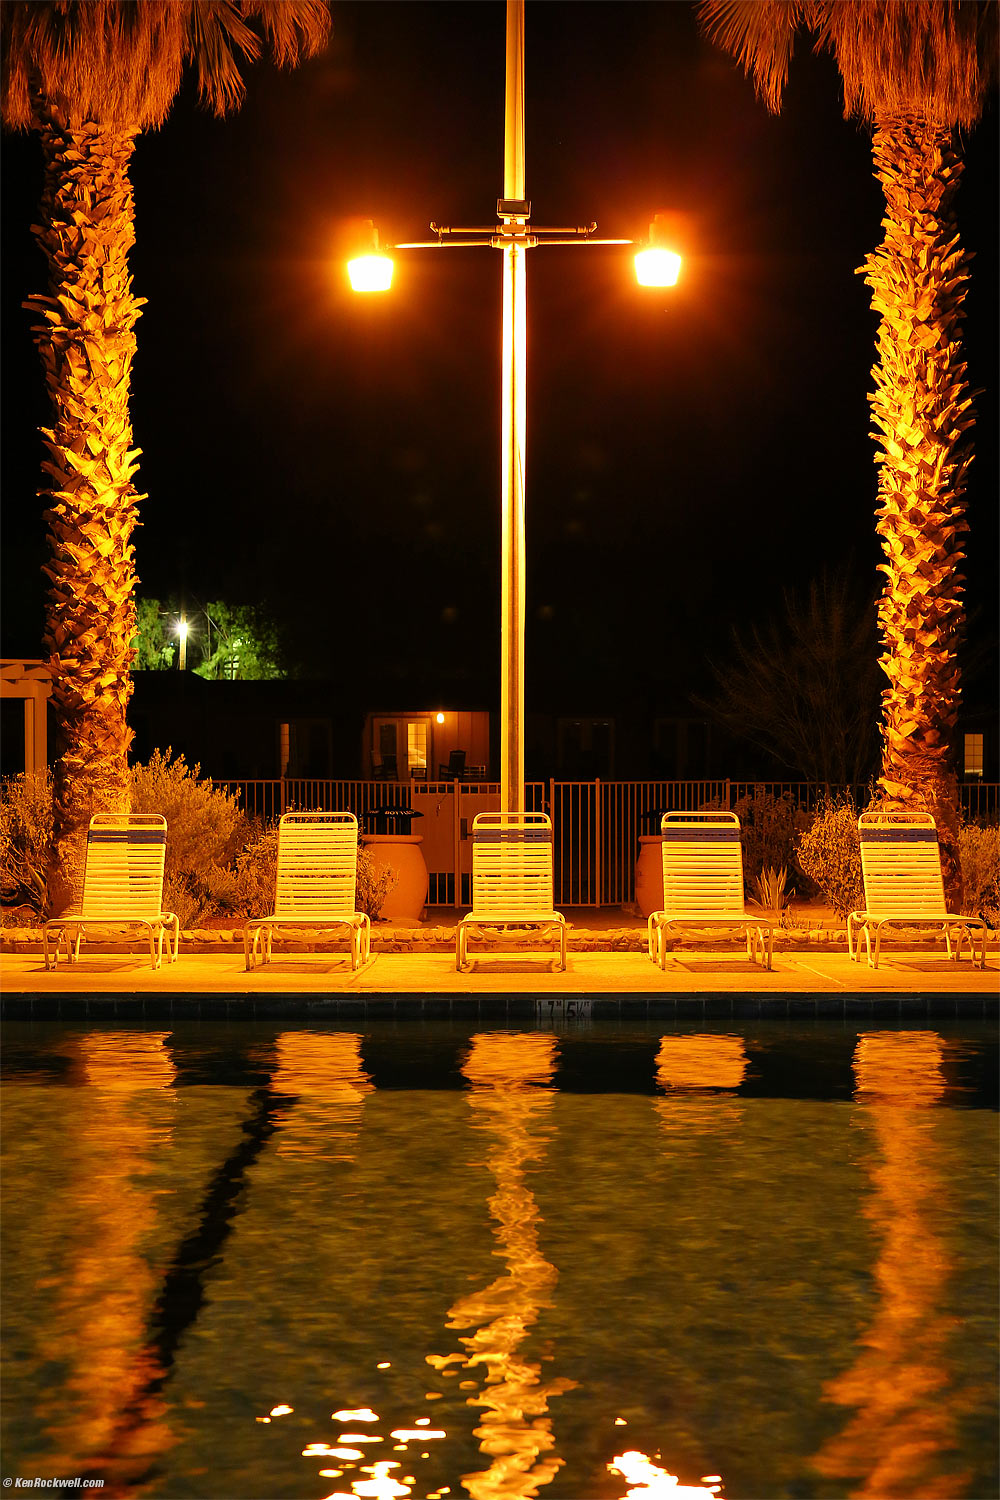 Deck chairs by the warm spring-fed pool, Furnace Creek Ranch, Death Valley, California 6:05 PM.